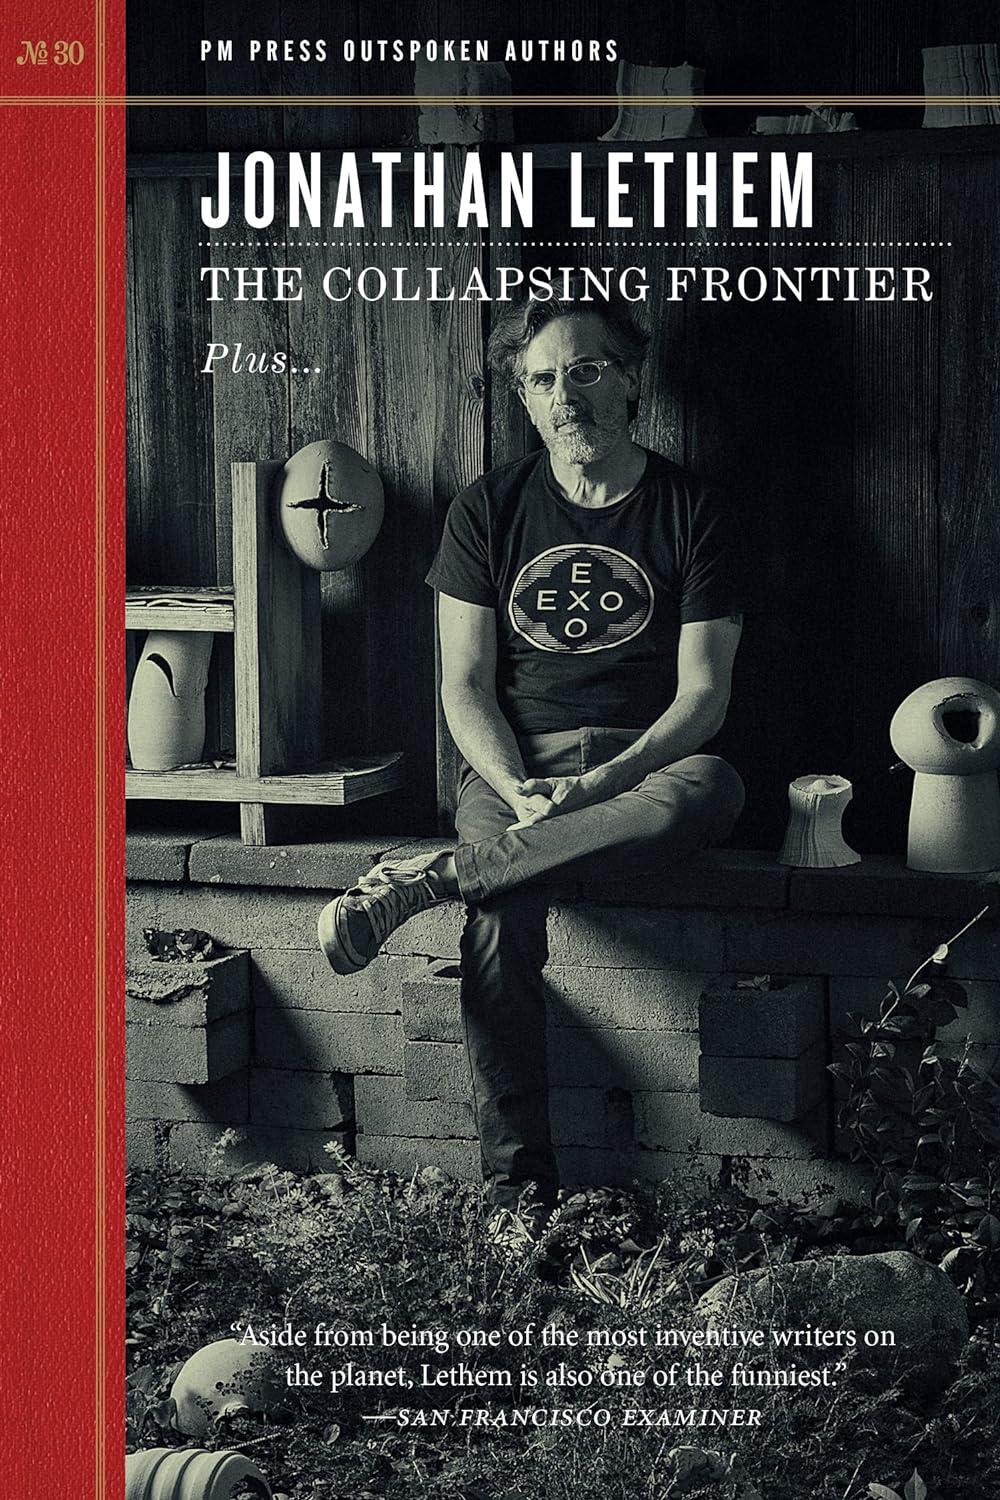 The Collapsing Frontier, by Jonathan Lethem